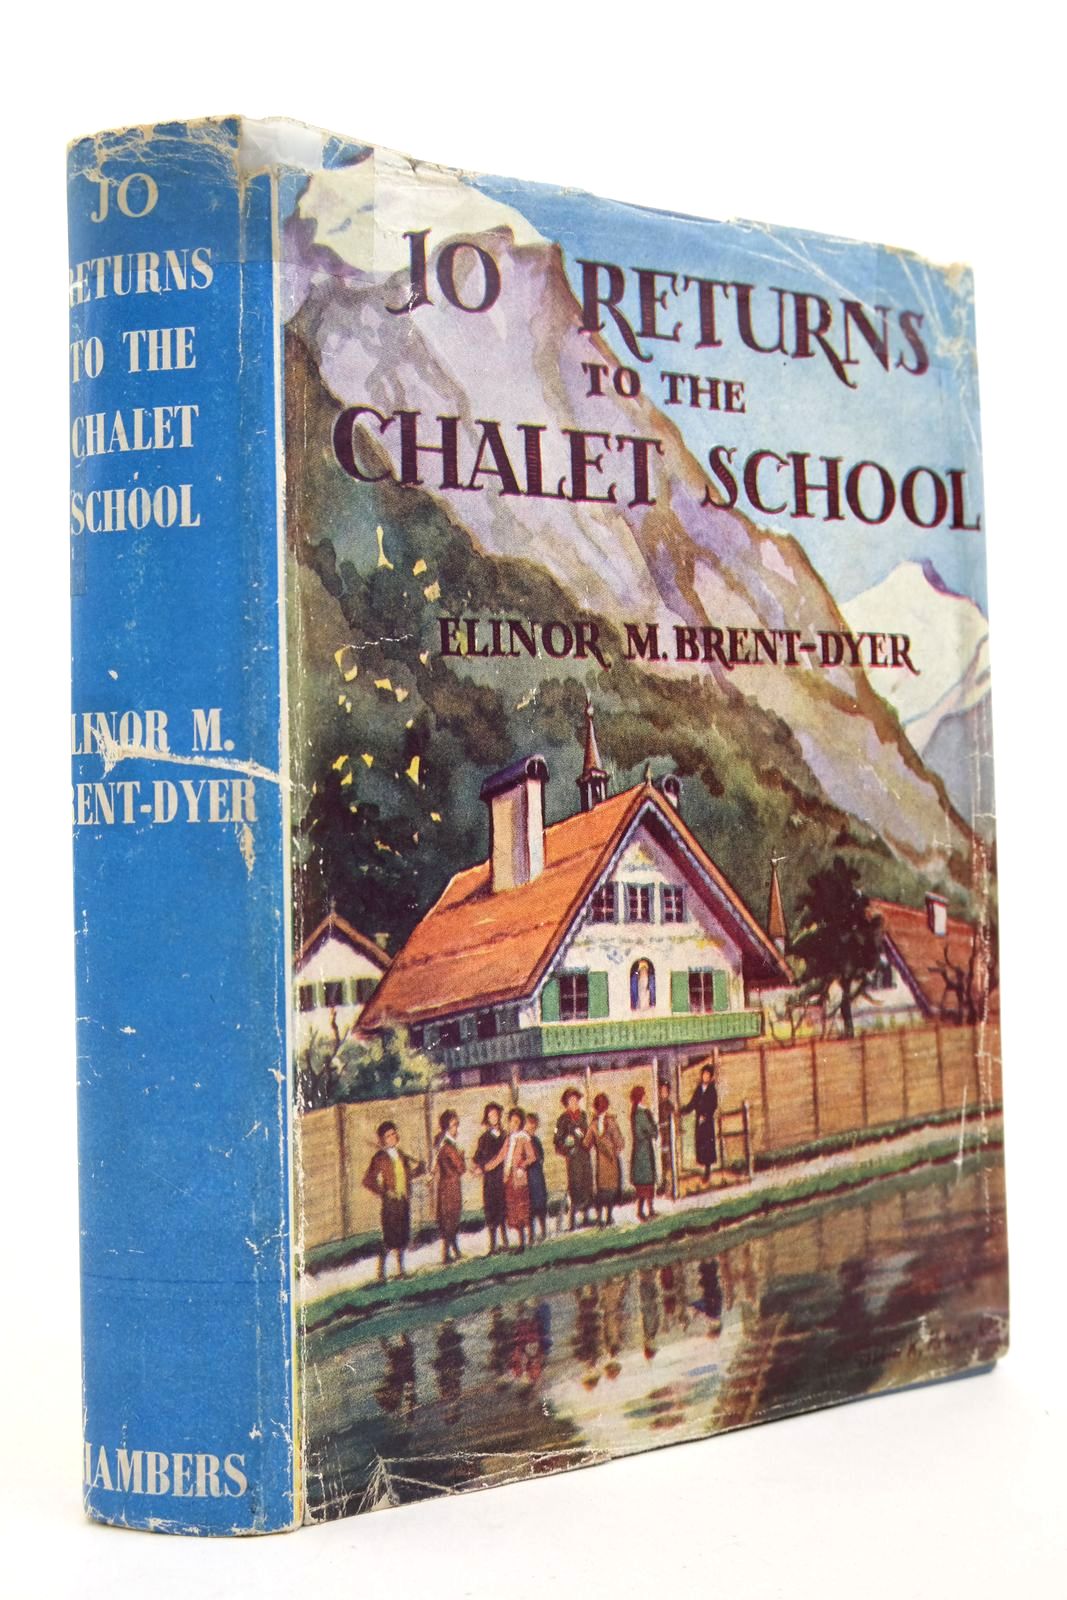 Photo of JO RETURNS TO THE CHALET SCHOOL written by Brent-Dyer, Elinor M. published by W. &amp; R. Chambers Limited (STOCK CODE: 2140081)  for sale by Stella & Rose's Books